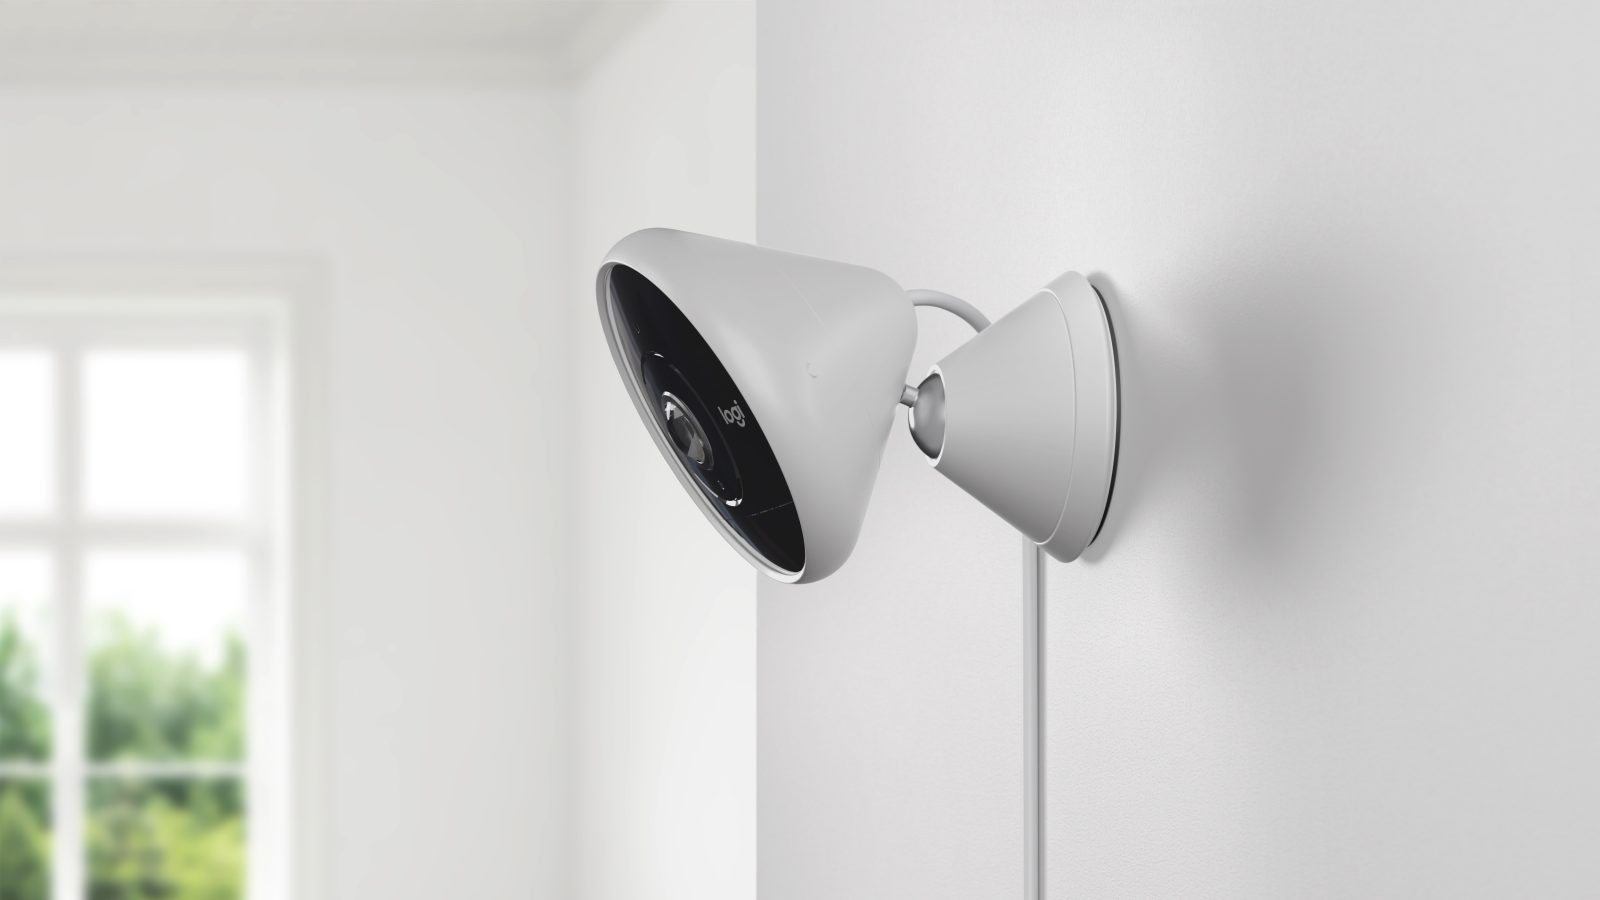 Logi Circle 2 HomeKit camera now easier to mount with new magnetic - 9to5Mac